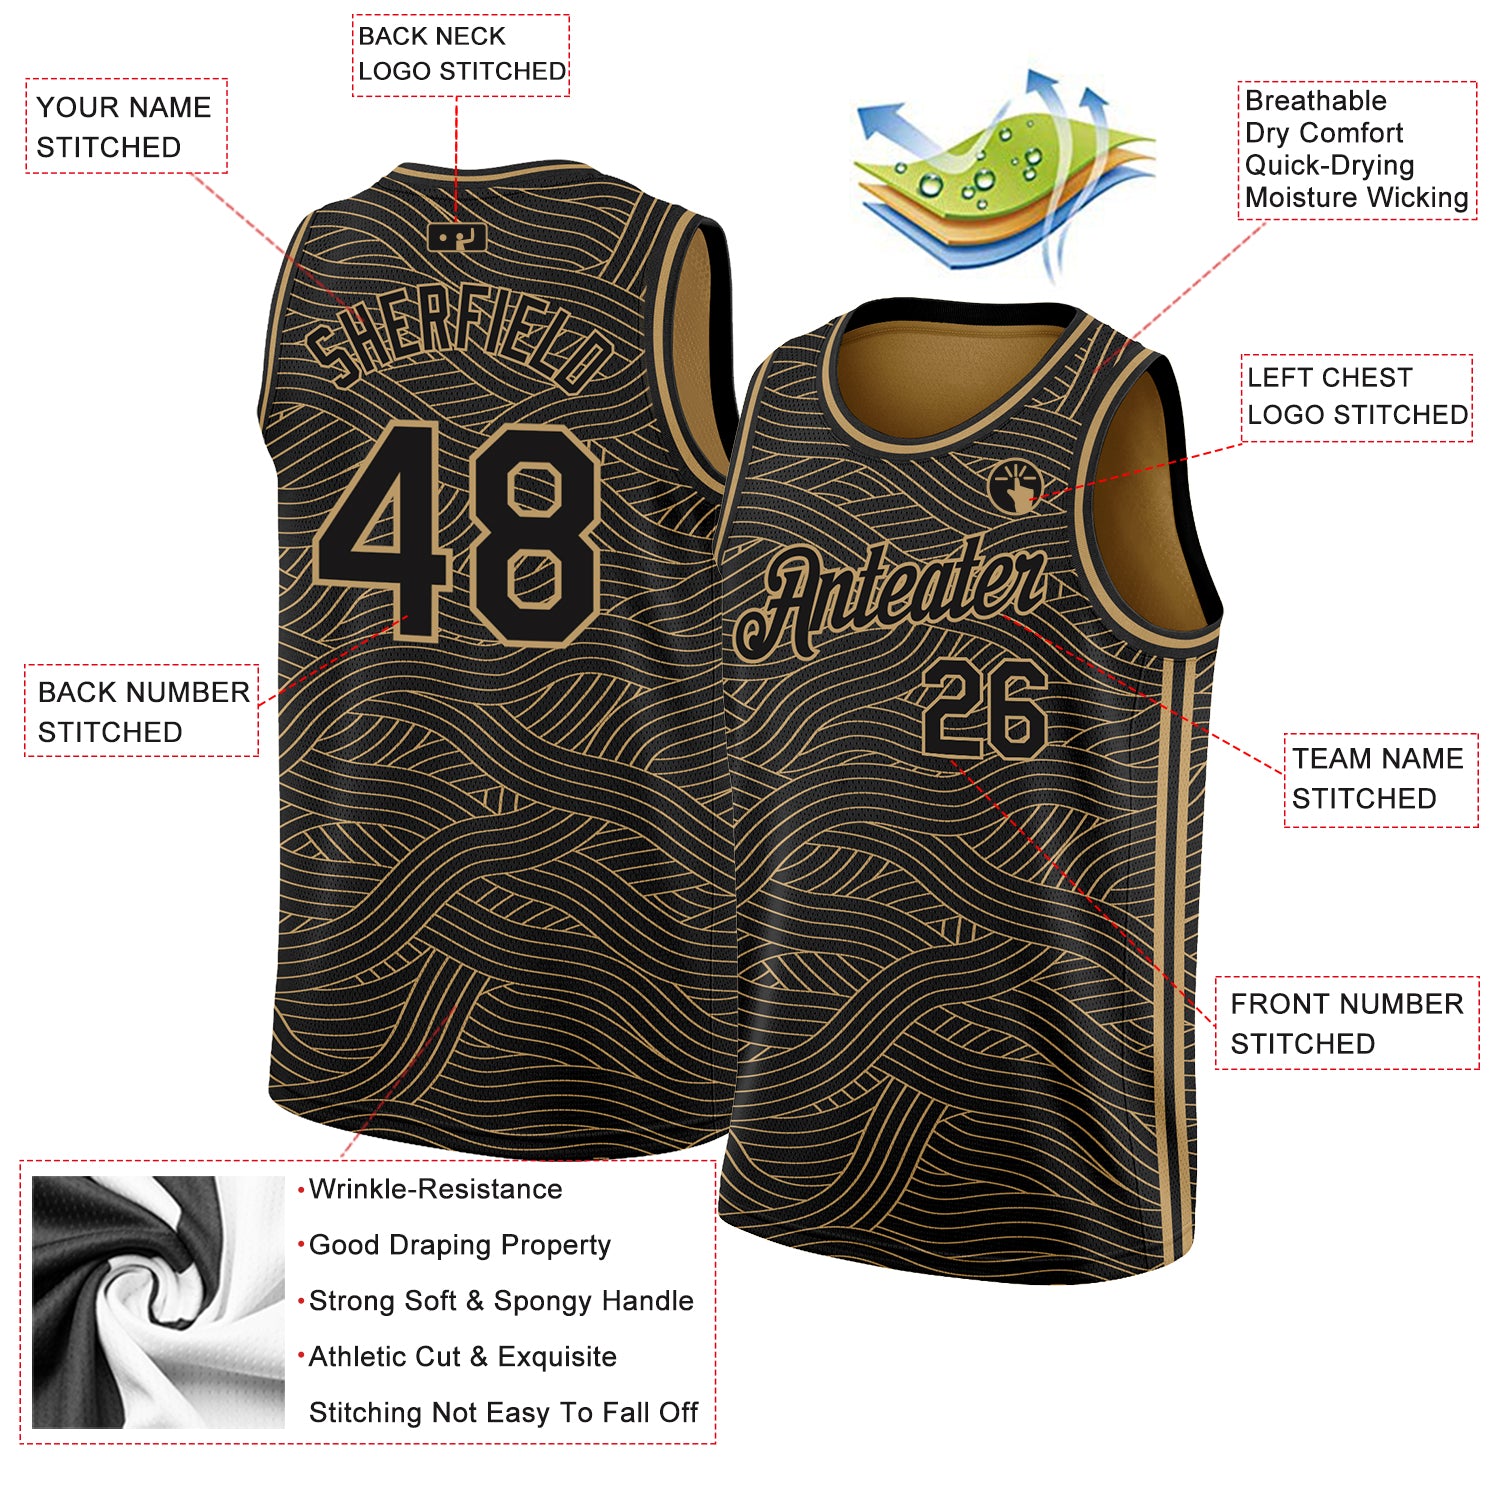 FANSIDEA Custom Silver Gray Old Gold-Black Authentic Throwback Basketball Jersey Youth Size:XL